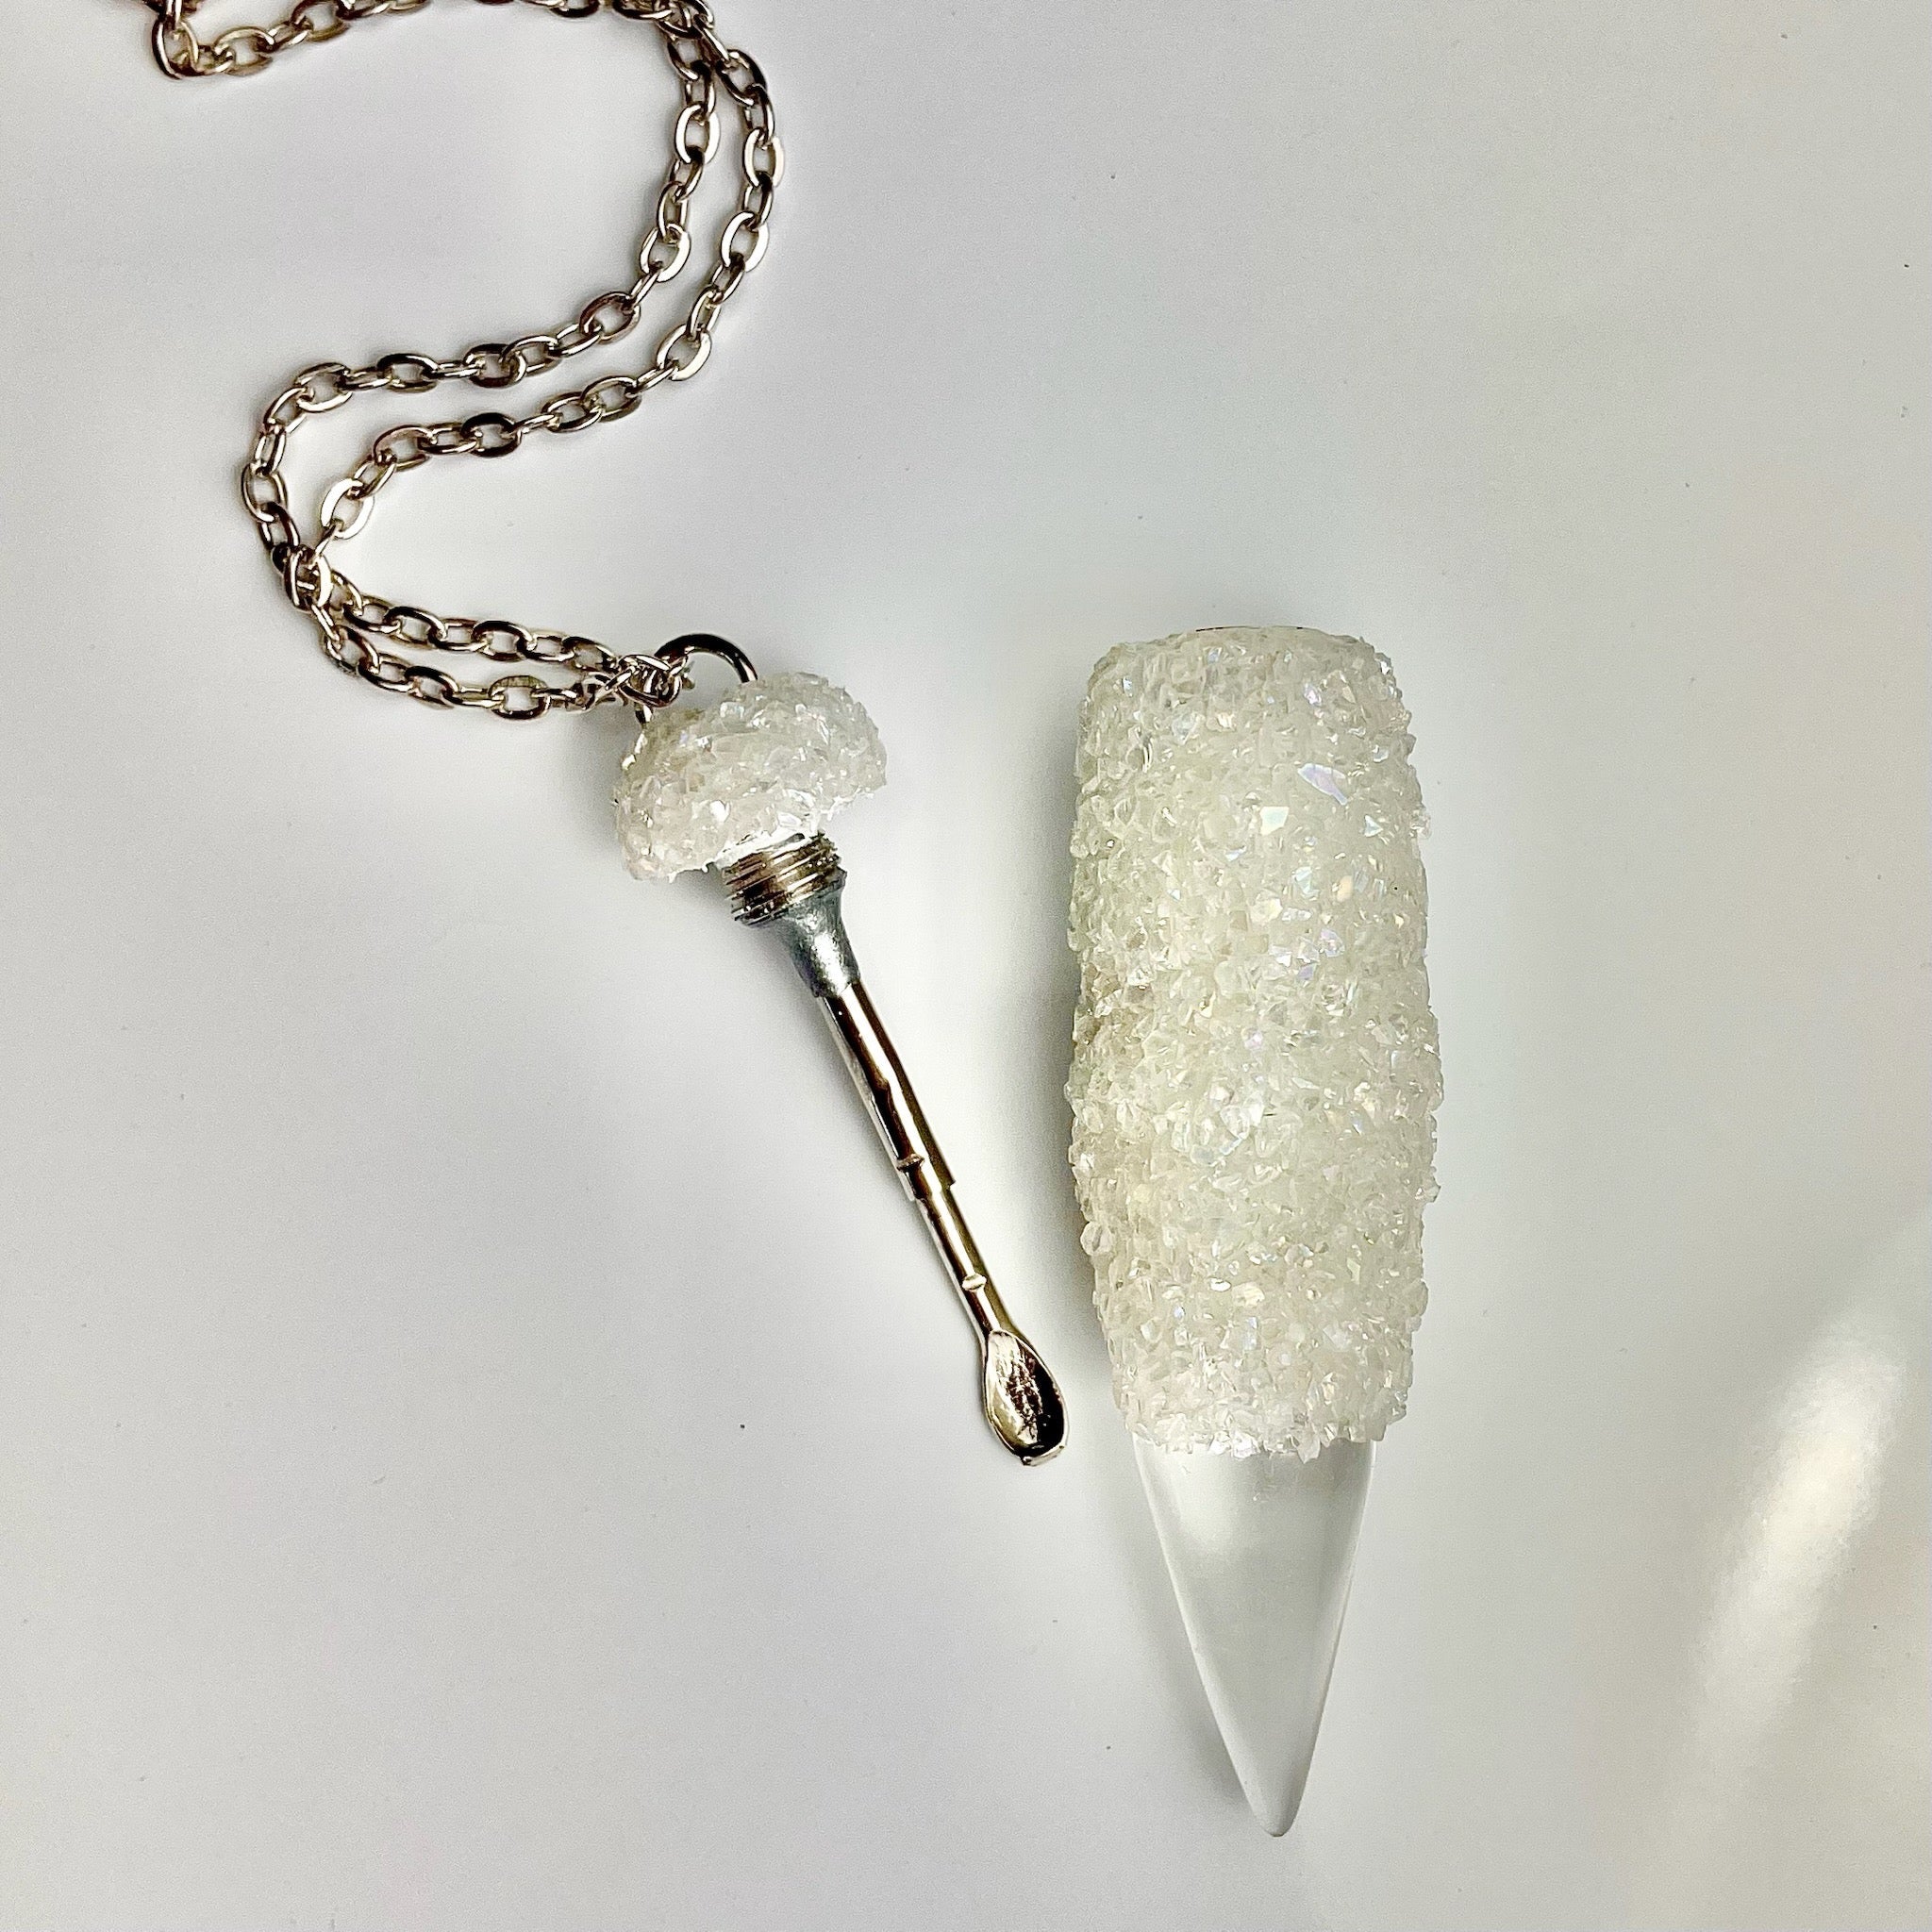 Stash Necklace Pendant + Spoon Detachable from Chain